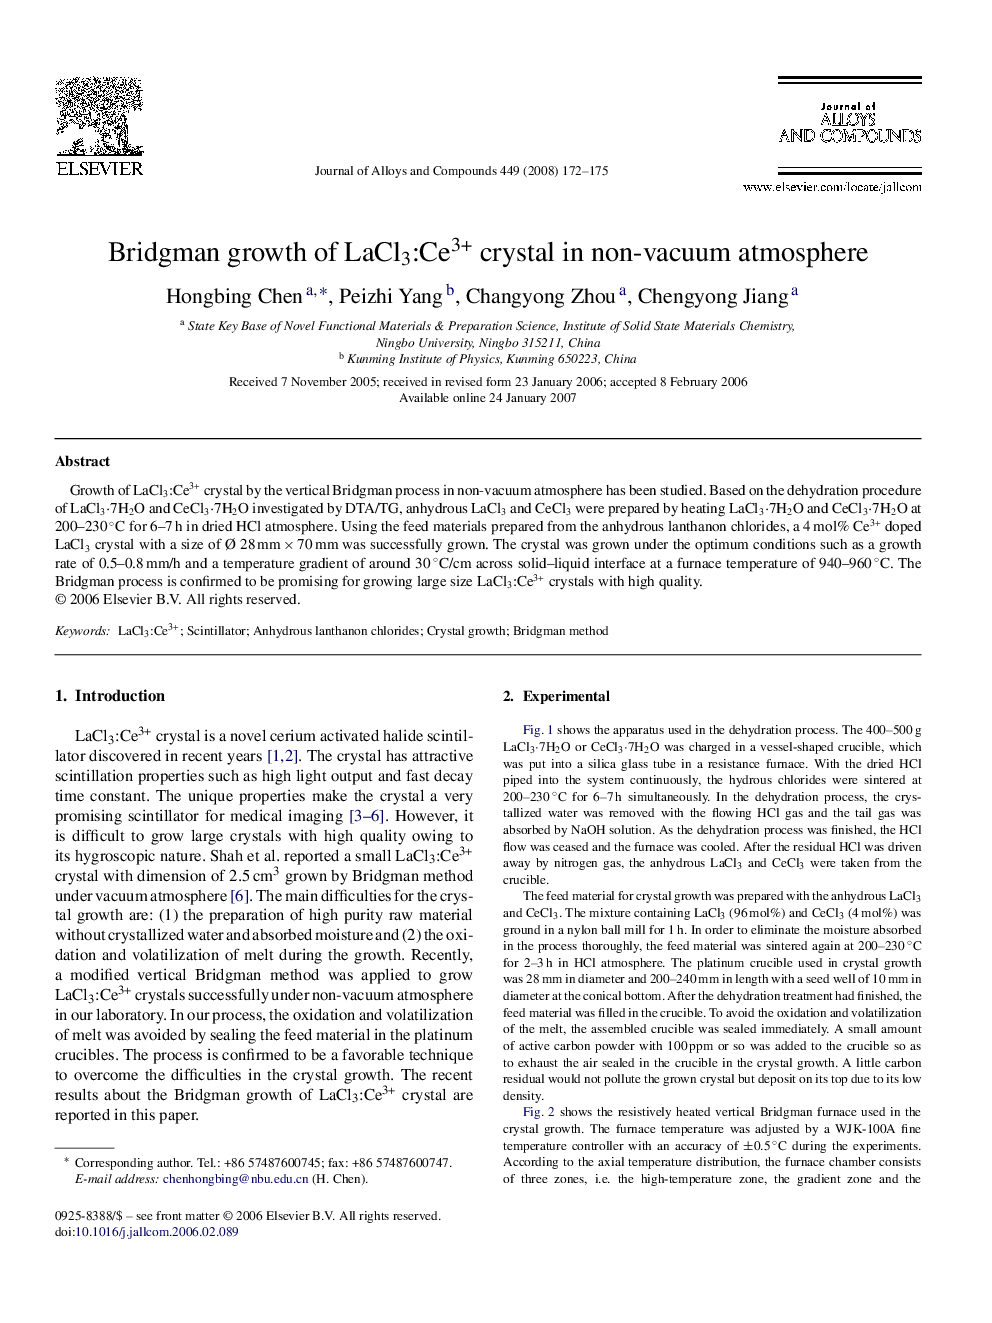 Bridgman growth of LaCl3:Ce3+ crystal in non-vacuum atmosphere